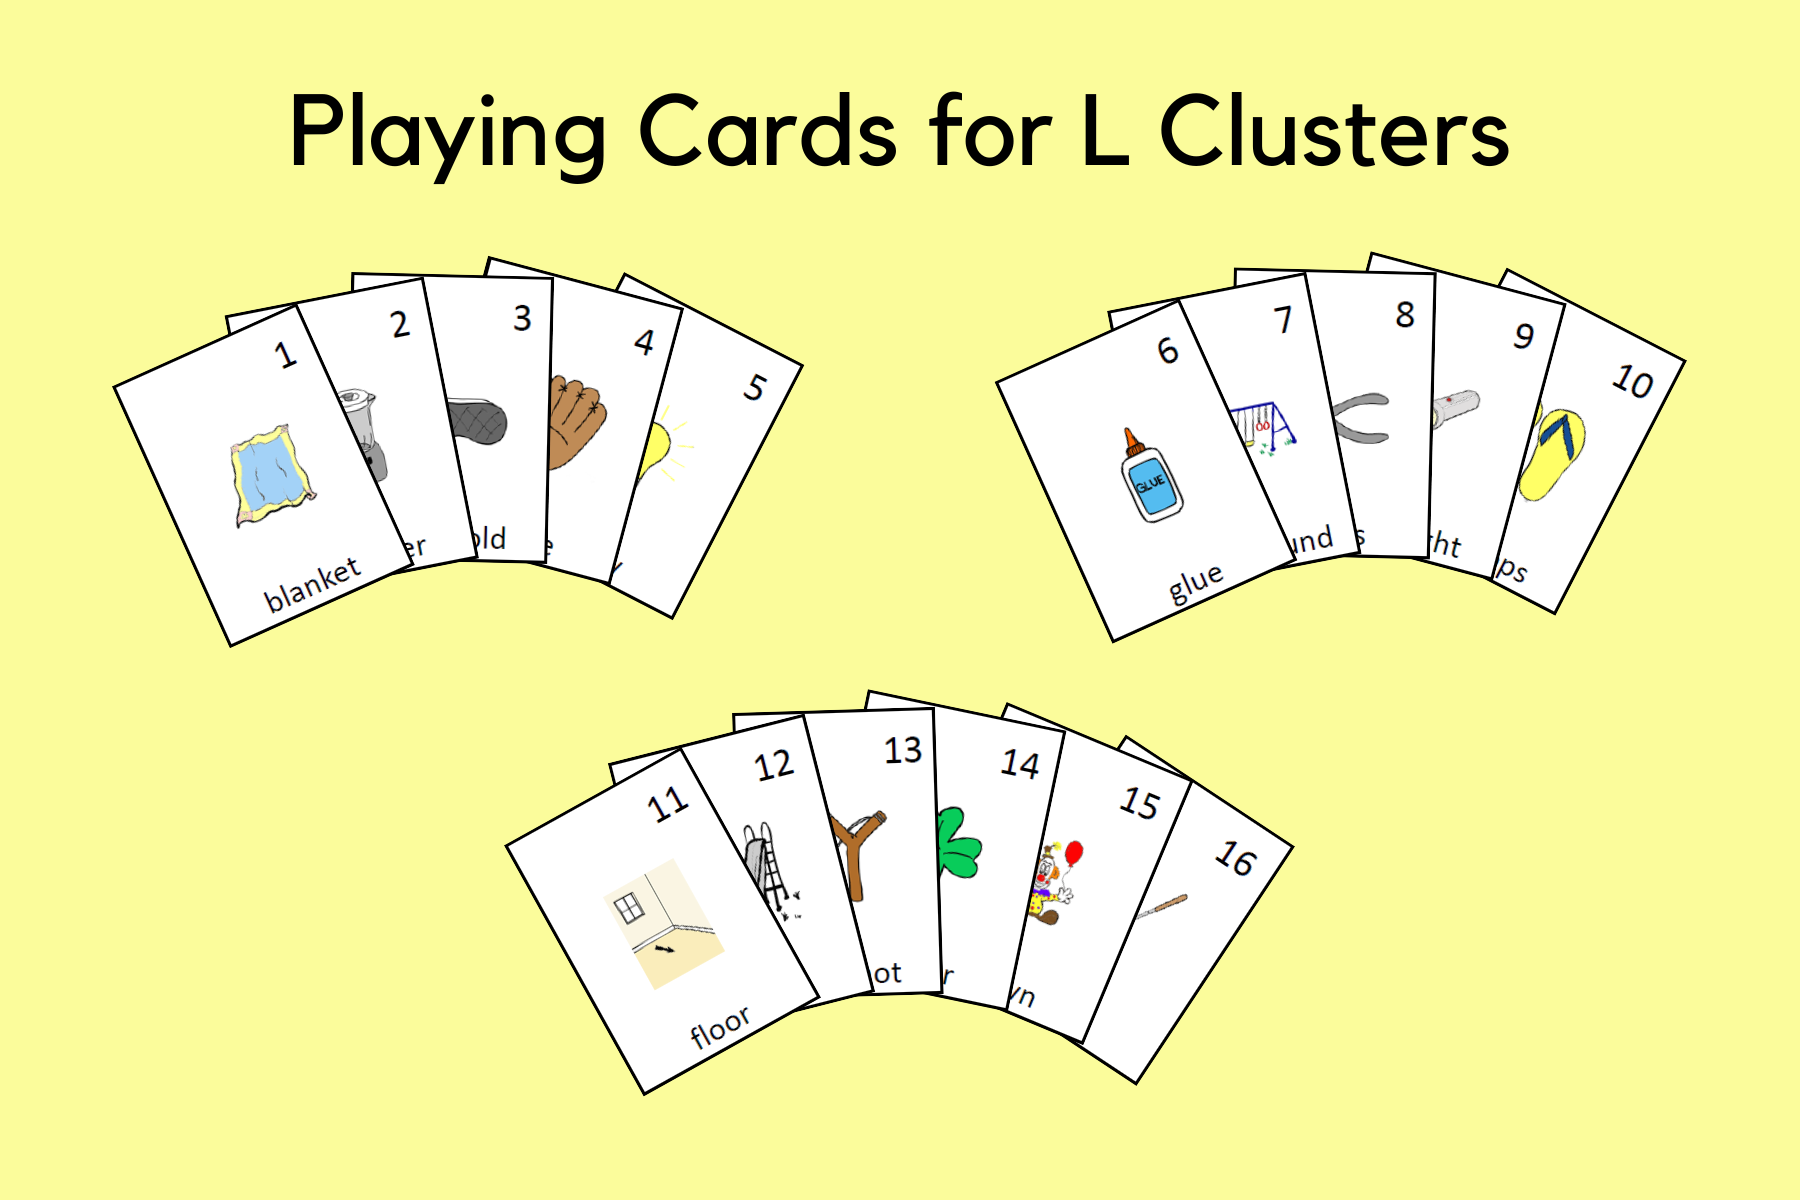 Playing Cards for L Clusters